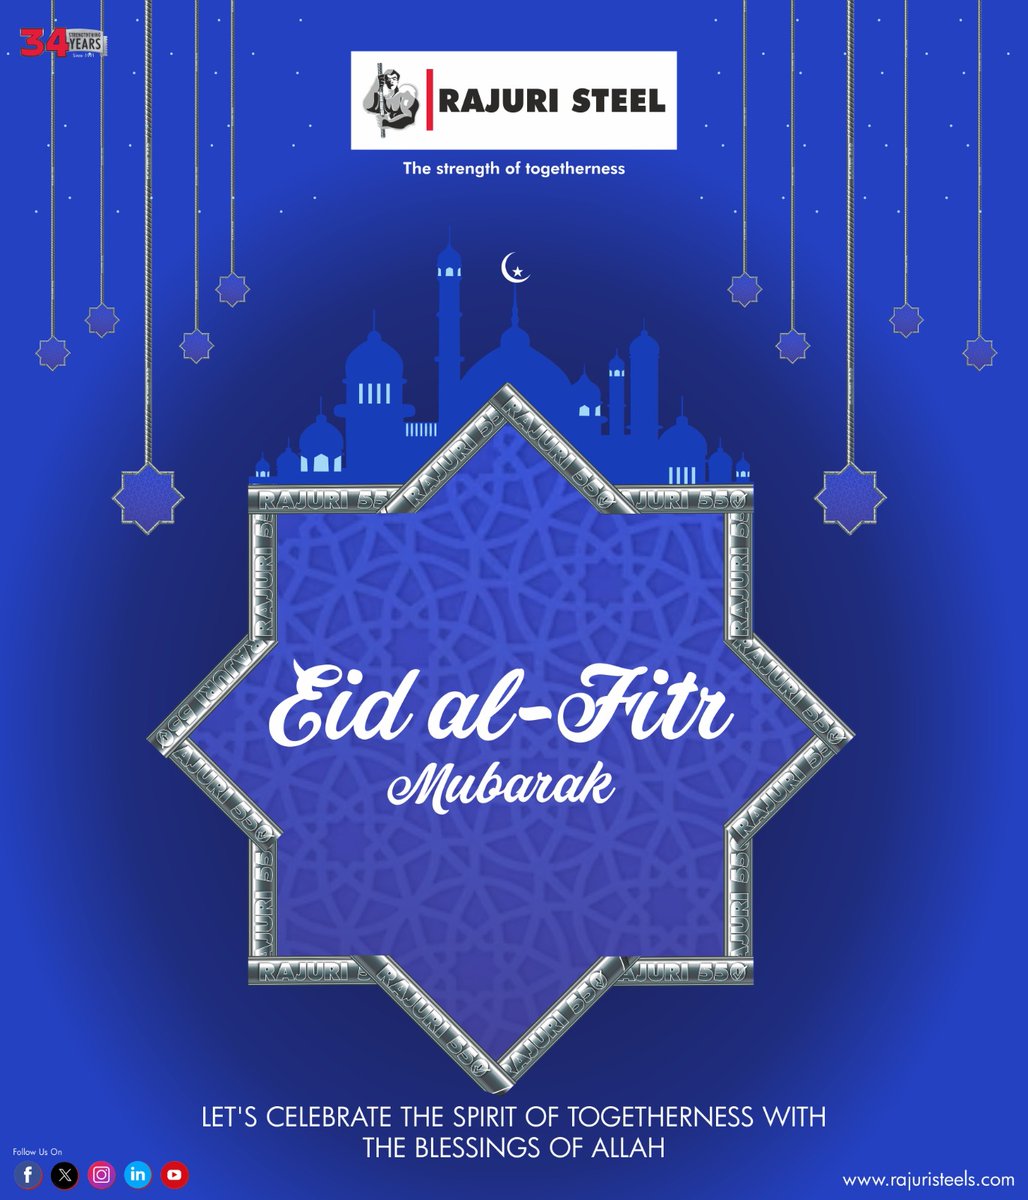 This Eid, let us come together and celebrate this special occasion strengthened by the divine blessings of Allah, guiding us towards a path of unwavering strength and prosperity.
Wishing you and your family Eid Mubarak!

#Eid #EidMubarak #RajuriSteel #TMTbars #TMTBar #Steelbar